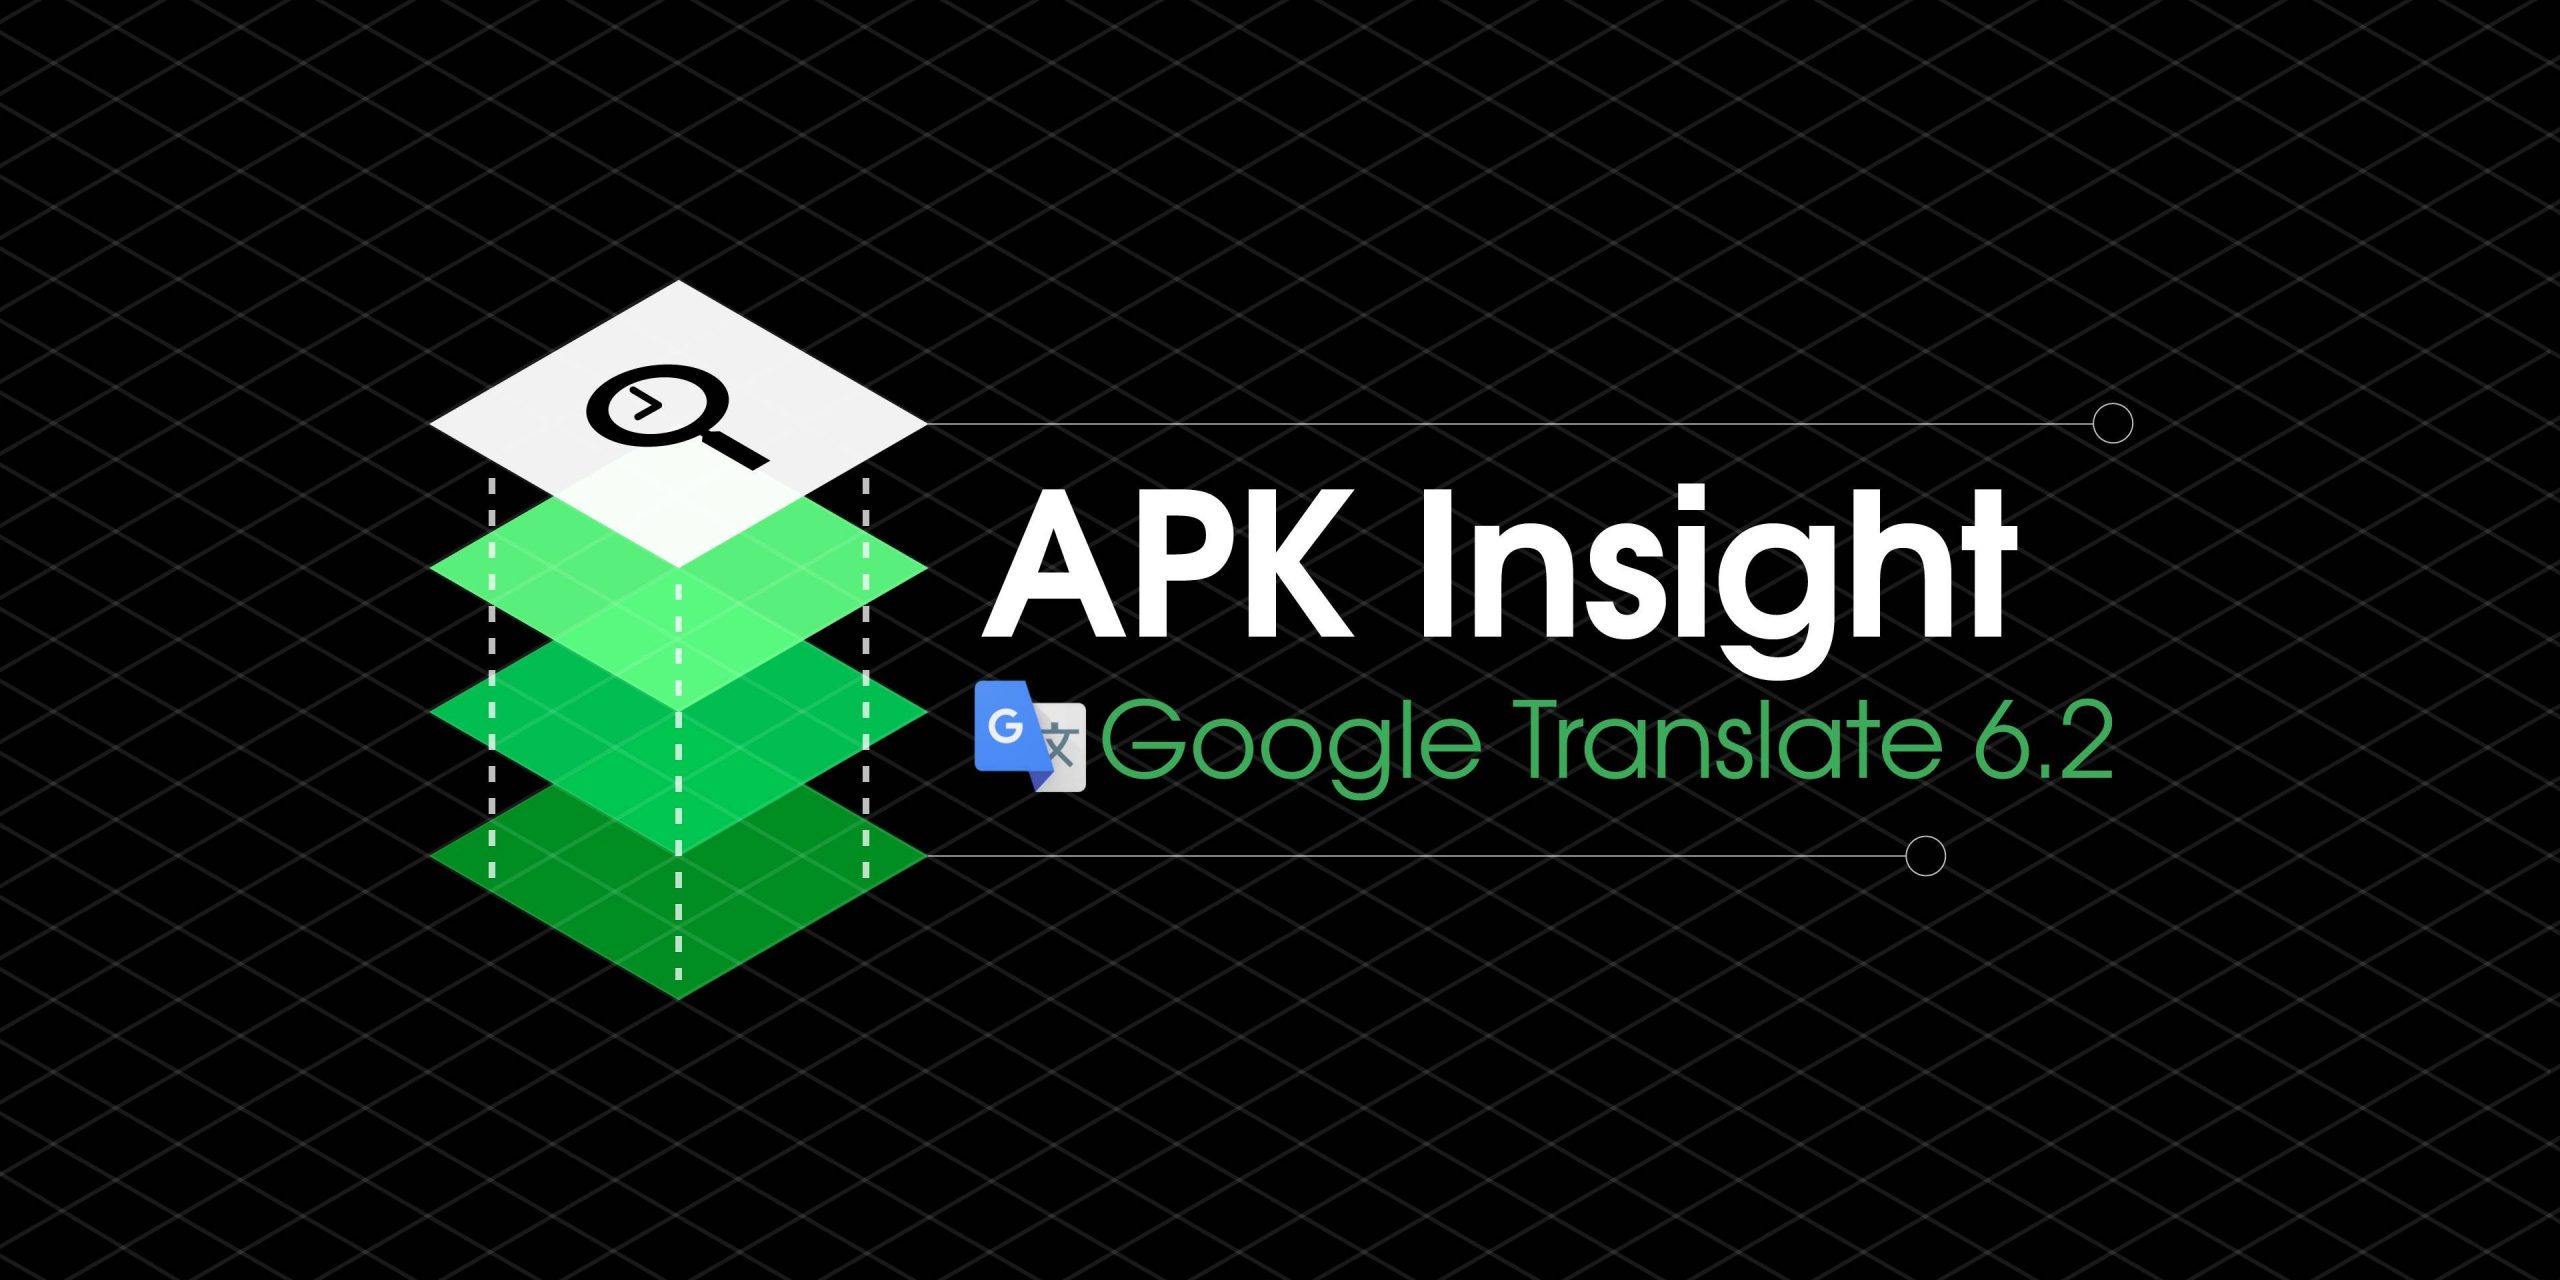 Google Tradutor 6.2 corrige 'Tap to Translate' no Android 10, prepara 'Continuous Translation' [APK Insight]